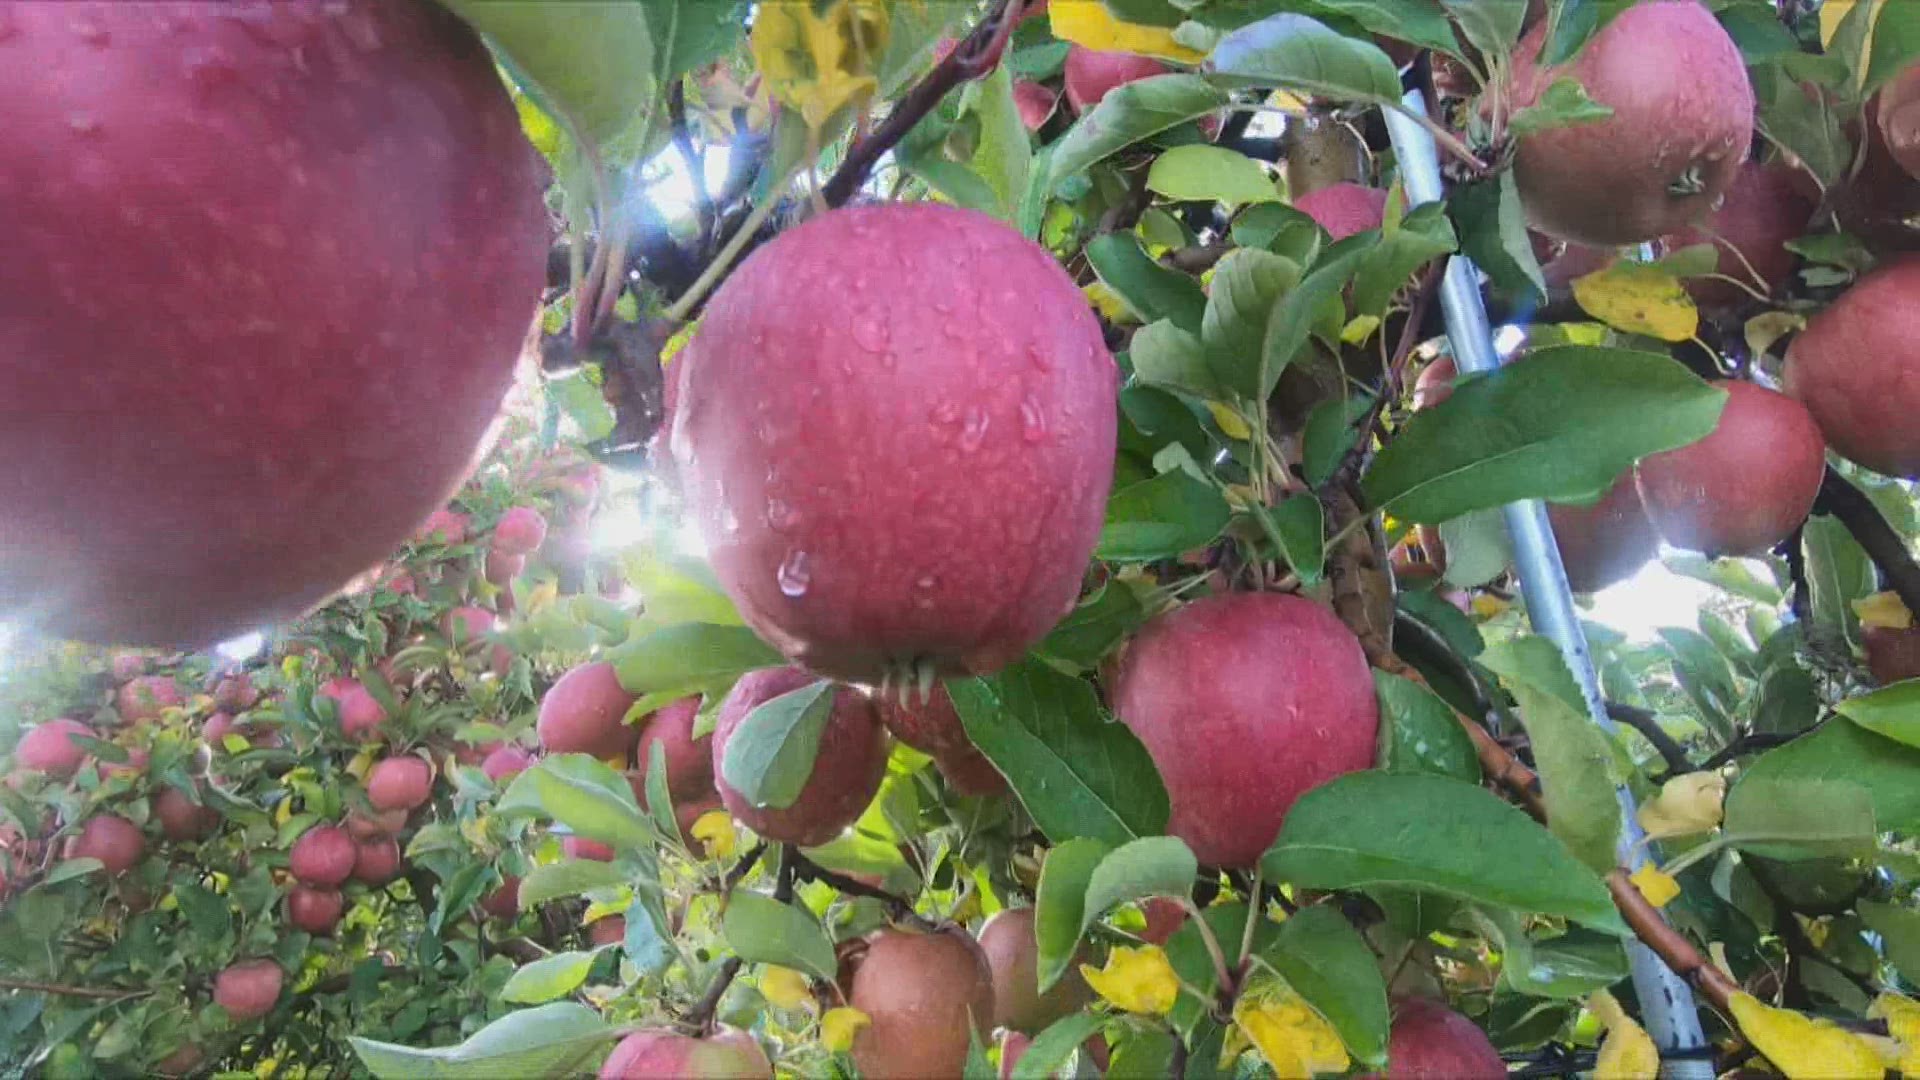 Michigan is the third largest producer of apples in the country, and local farmers are excited for this year's apple season.